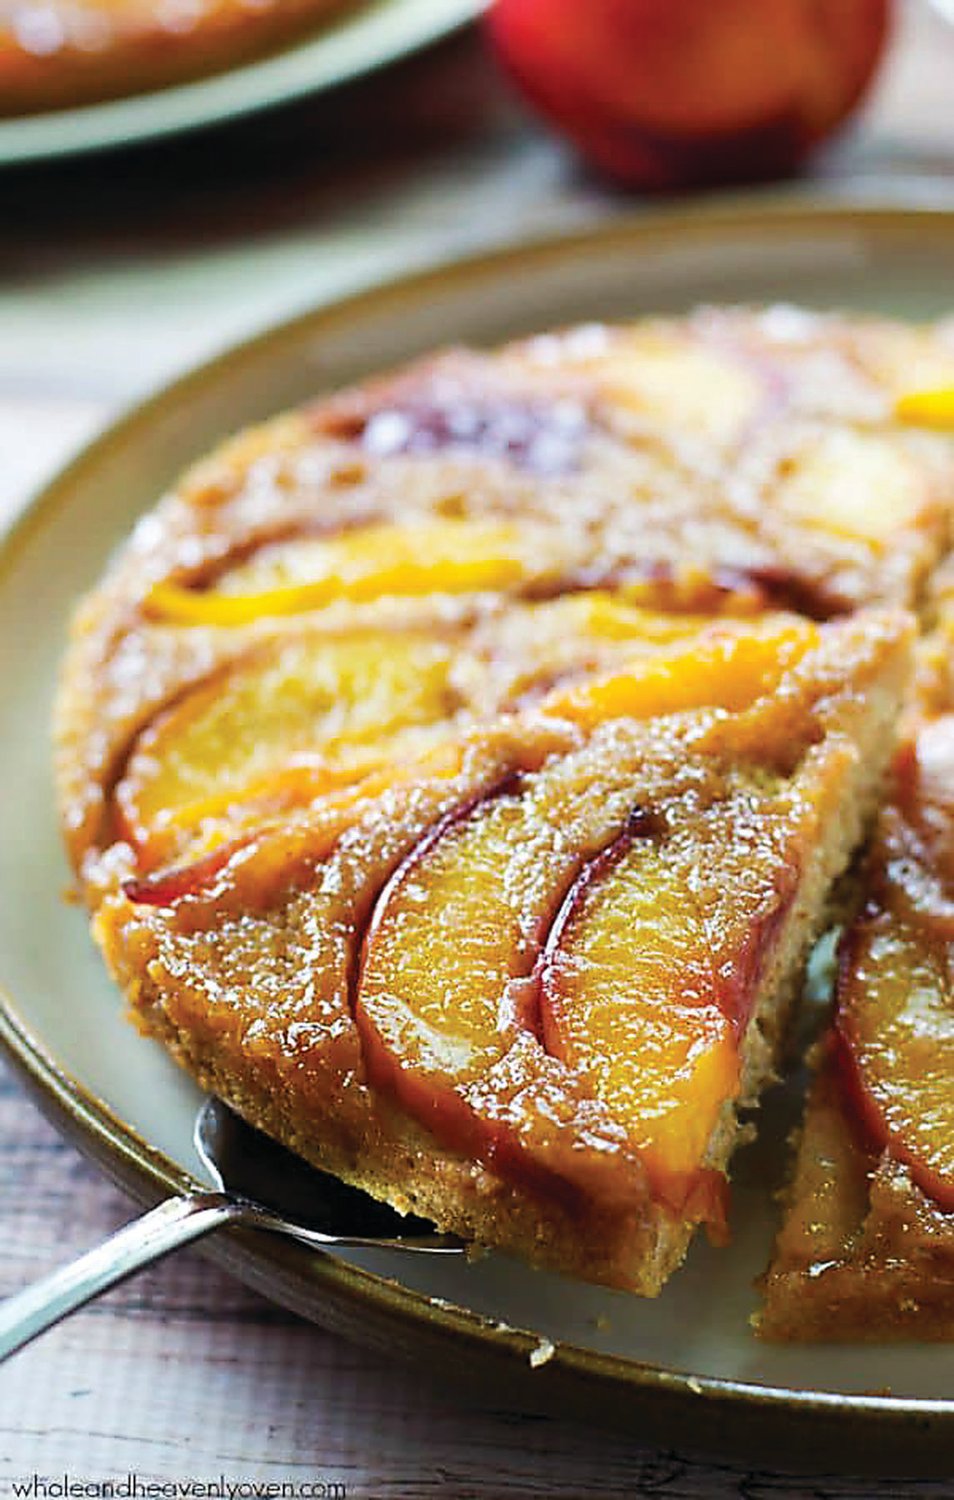 This peach upside-down cake is one way to enjoy the bumper crop of local peaches.